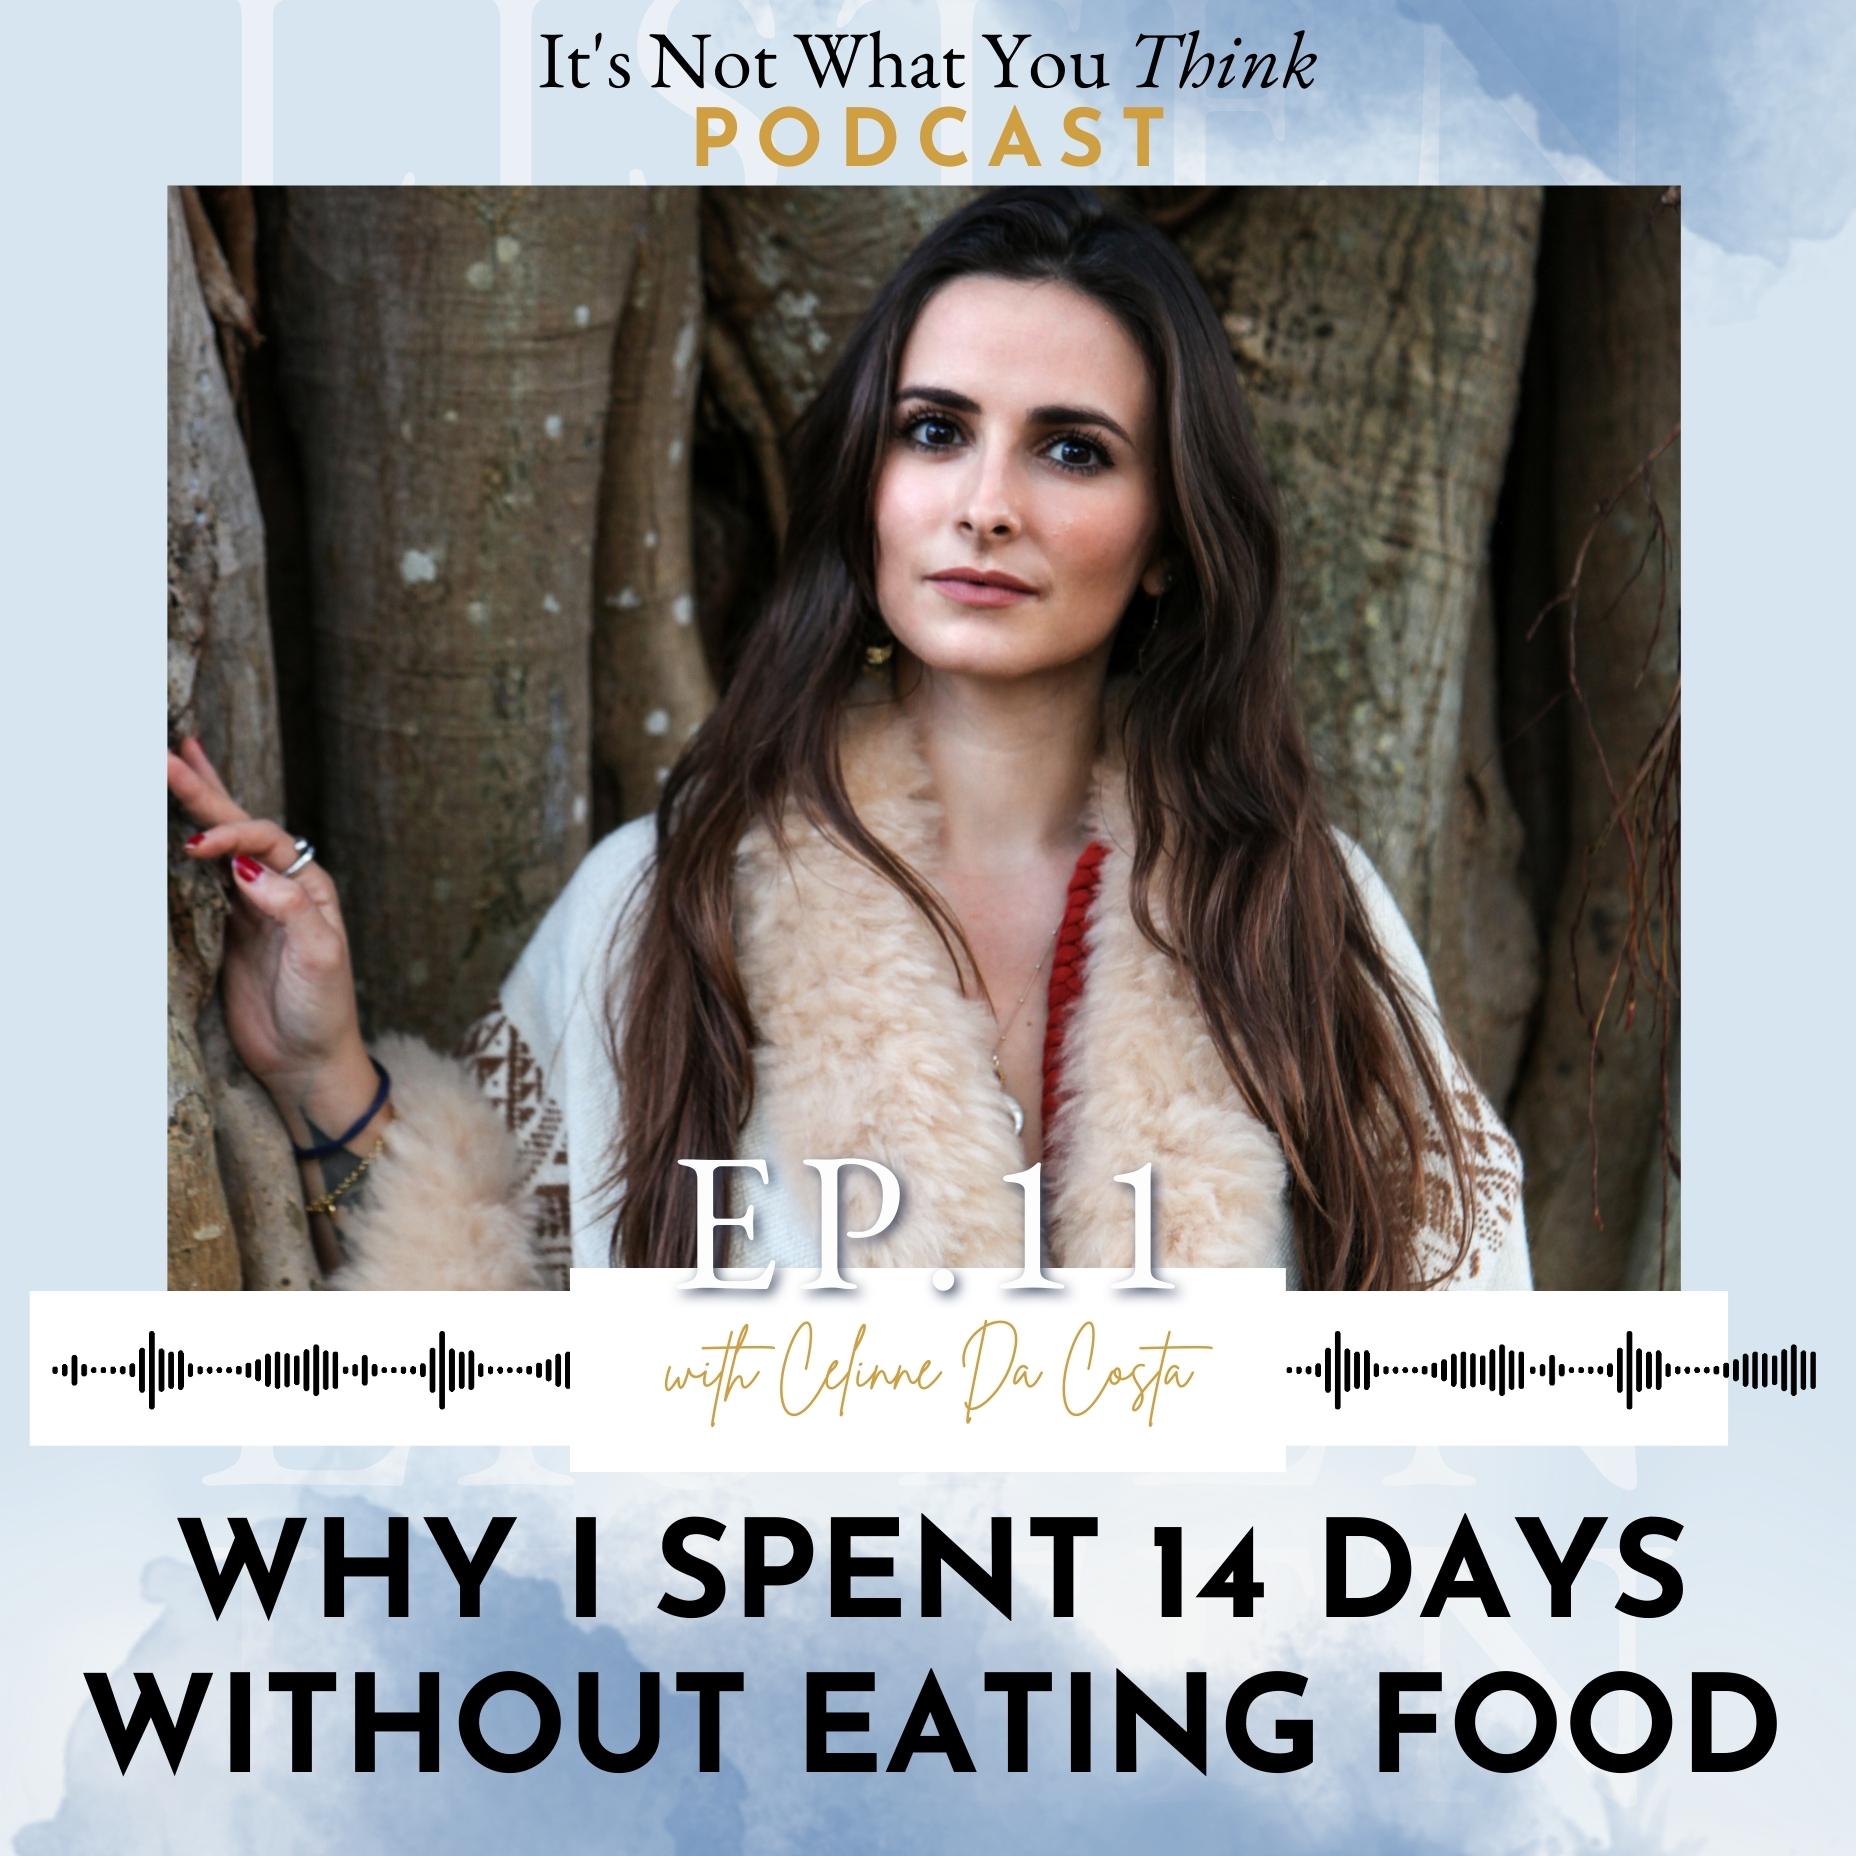 Food and Why I Spent 14 Days Without Eating It | Ep 11